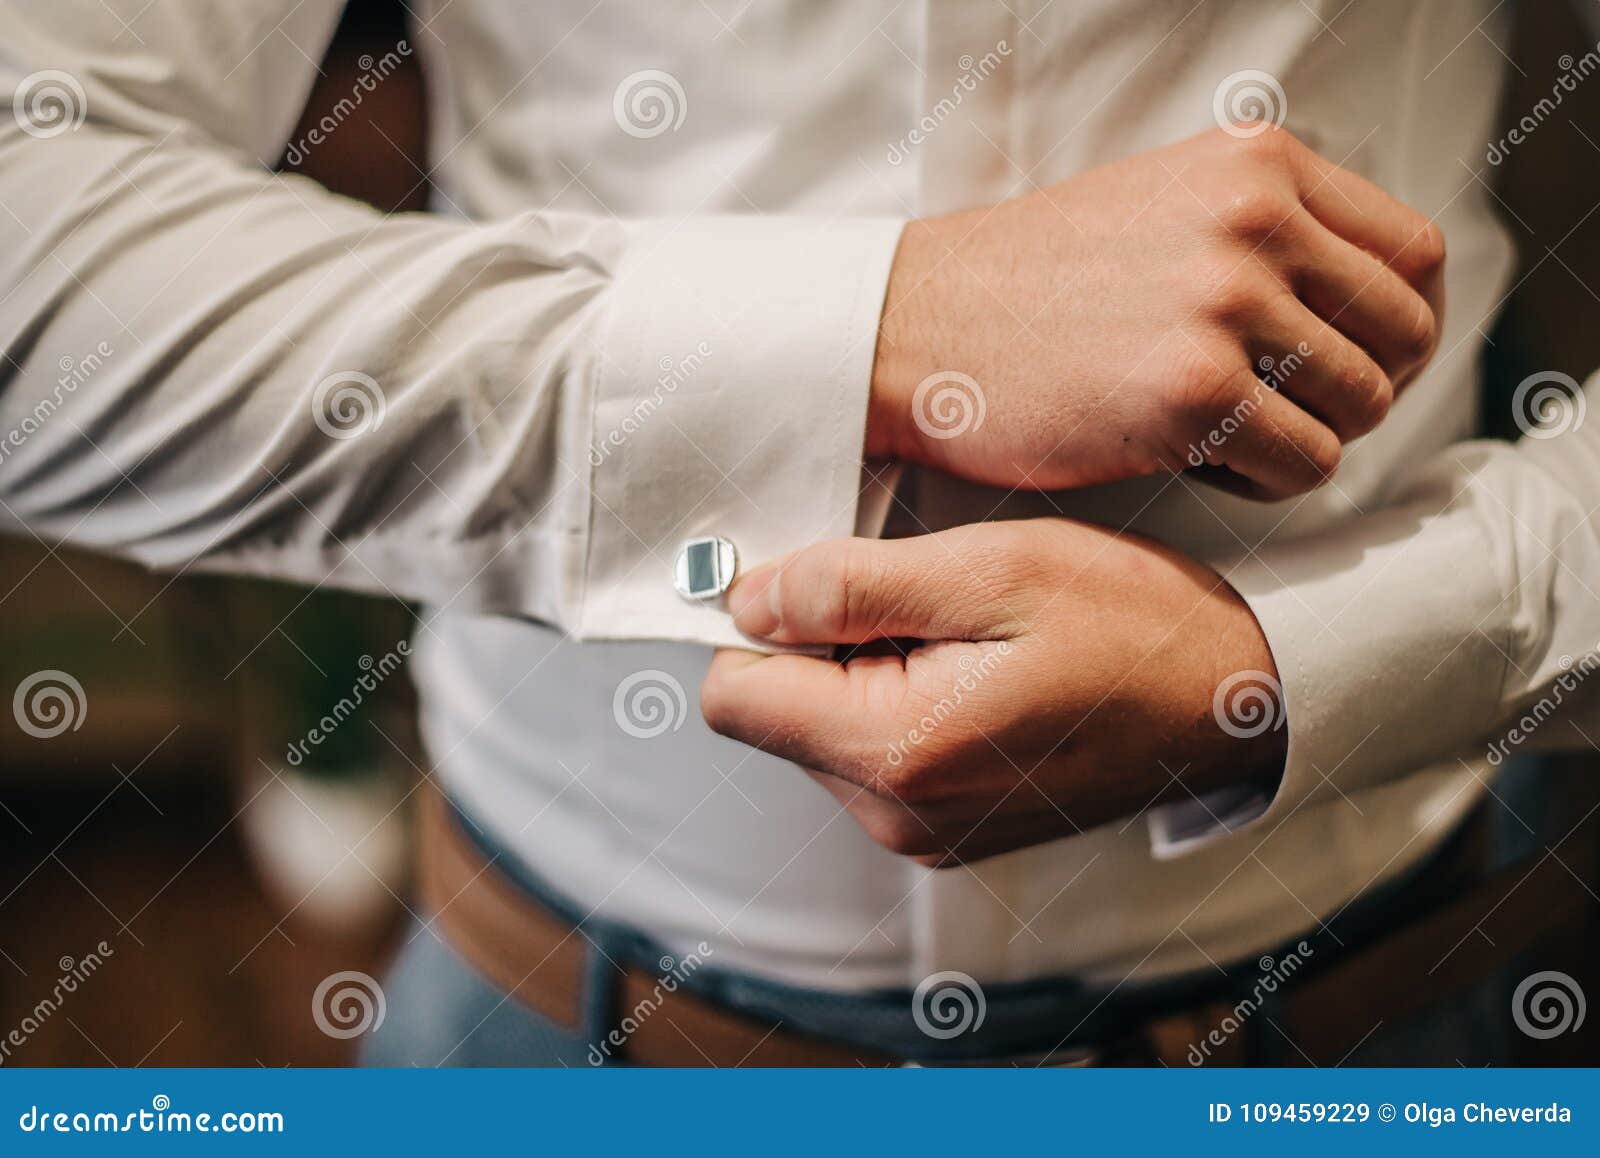 Cufflinks on the White Shirt of the Groom Stock Image - Image of dress ...